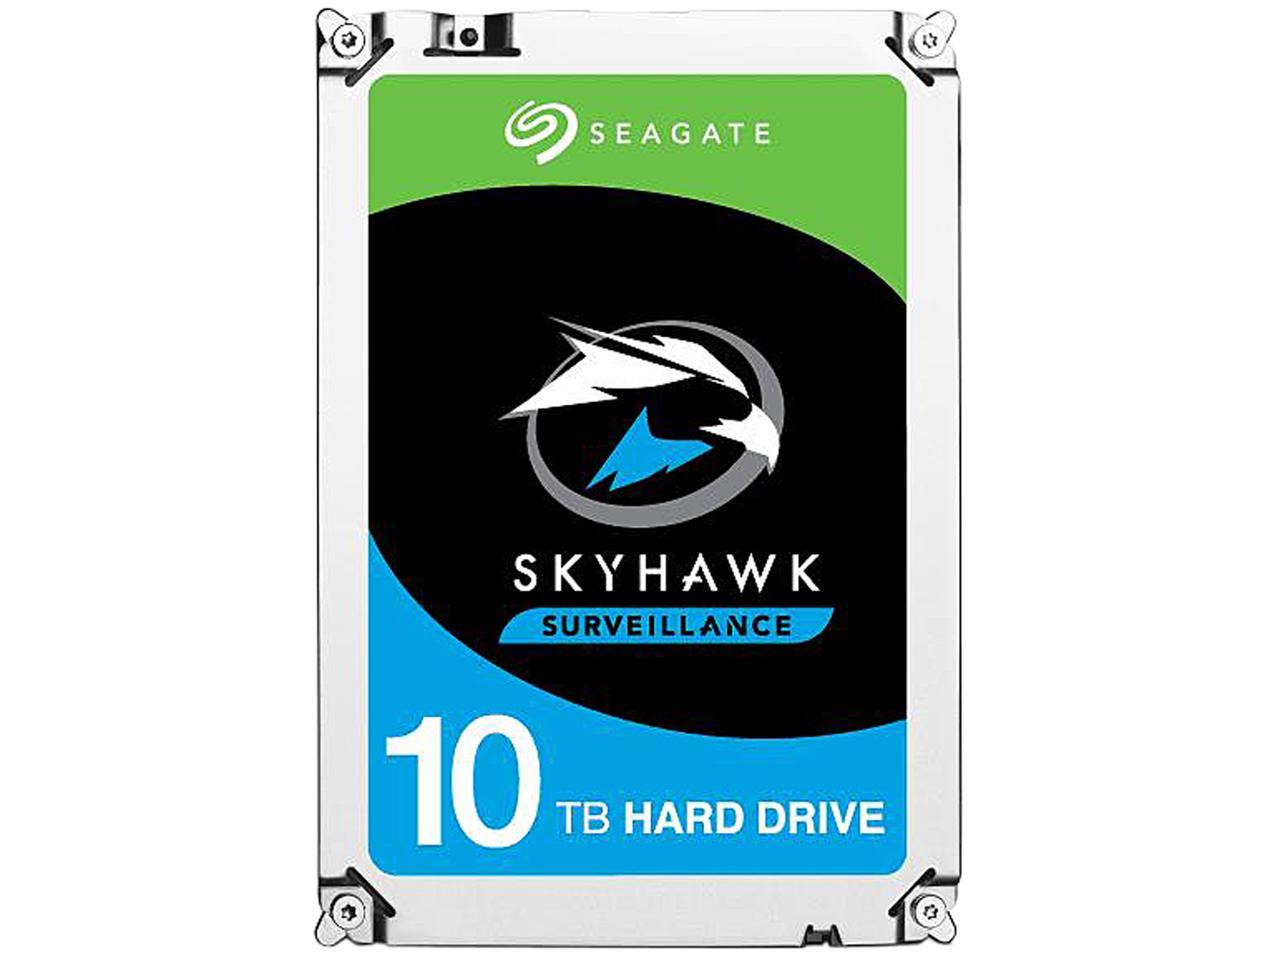 3.5 Inch SATA 6Gb/s 256MB Cache for DVR NVR Security Camera System with Drive Health Management Frustration Free Packaging Seagate Skyhawk 10TB Surveillance Internal Hard Drive HDD ST10000VX0004